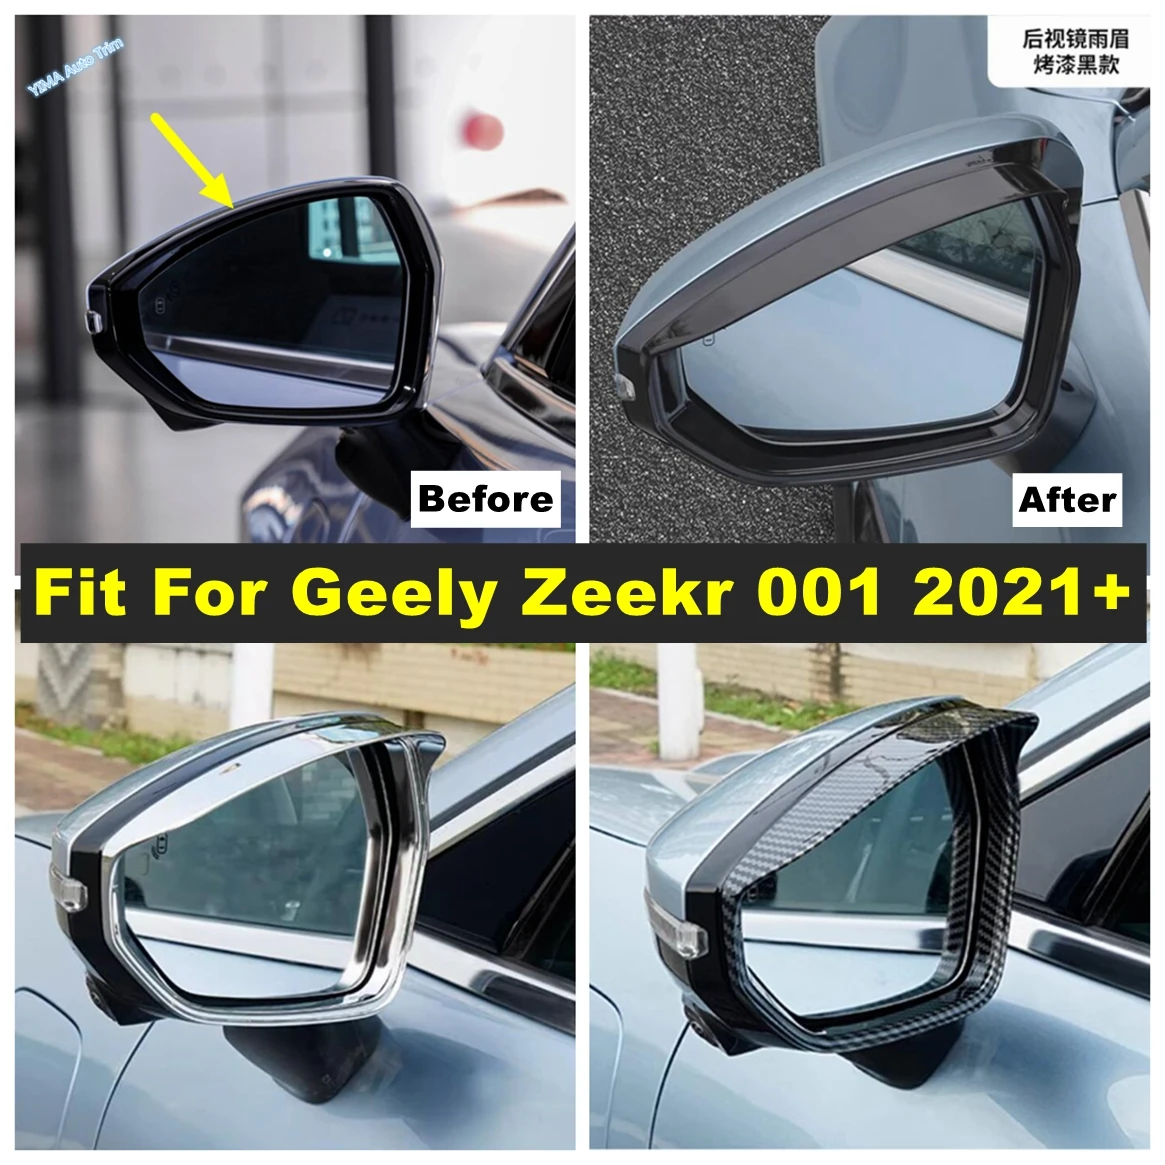 

Car Rearview Mirror Block Rain Eyebrow Cover Fit For Geely Zeekr 001 2021 - 2023 Exterior Decoration Styling Sticker Accessories